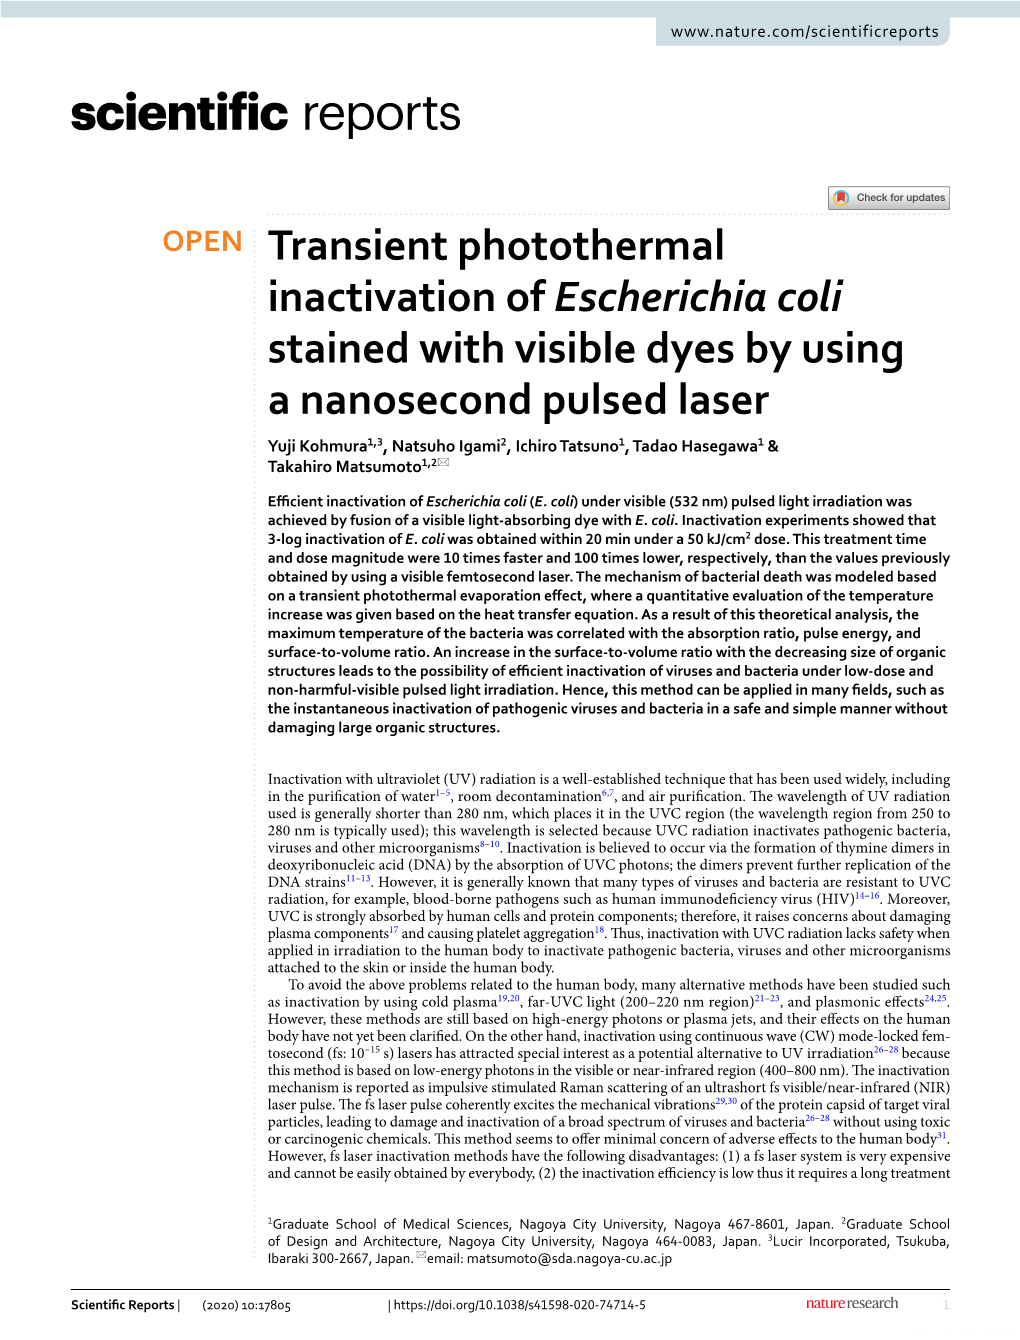 Transient Photothermal Inactivation of Escherichia Coli Stained with Visible